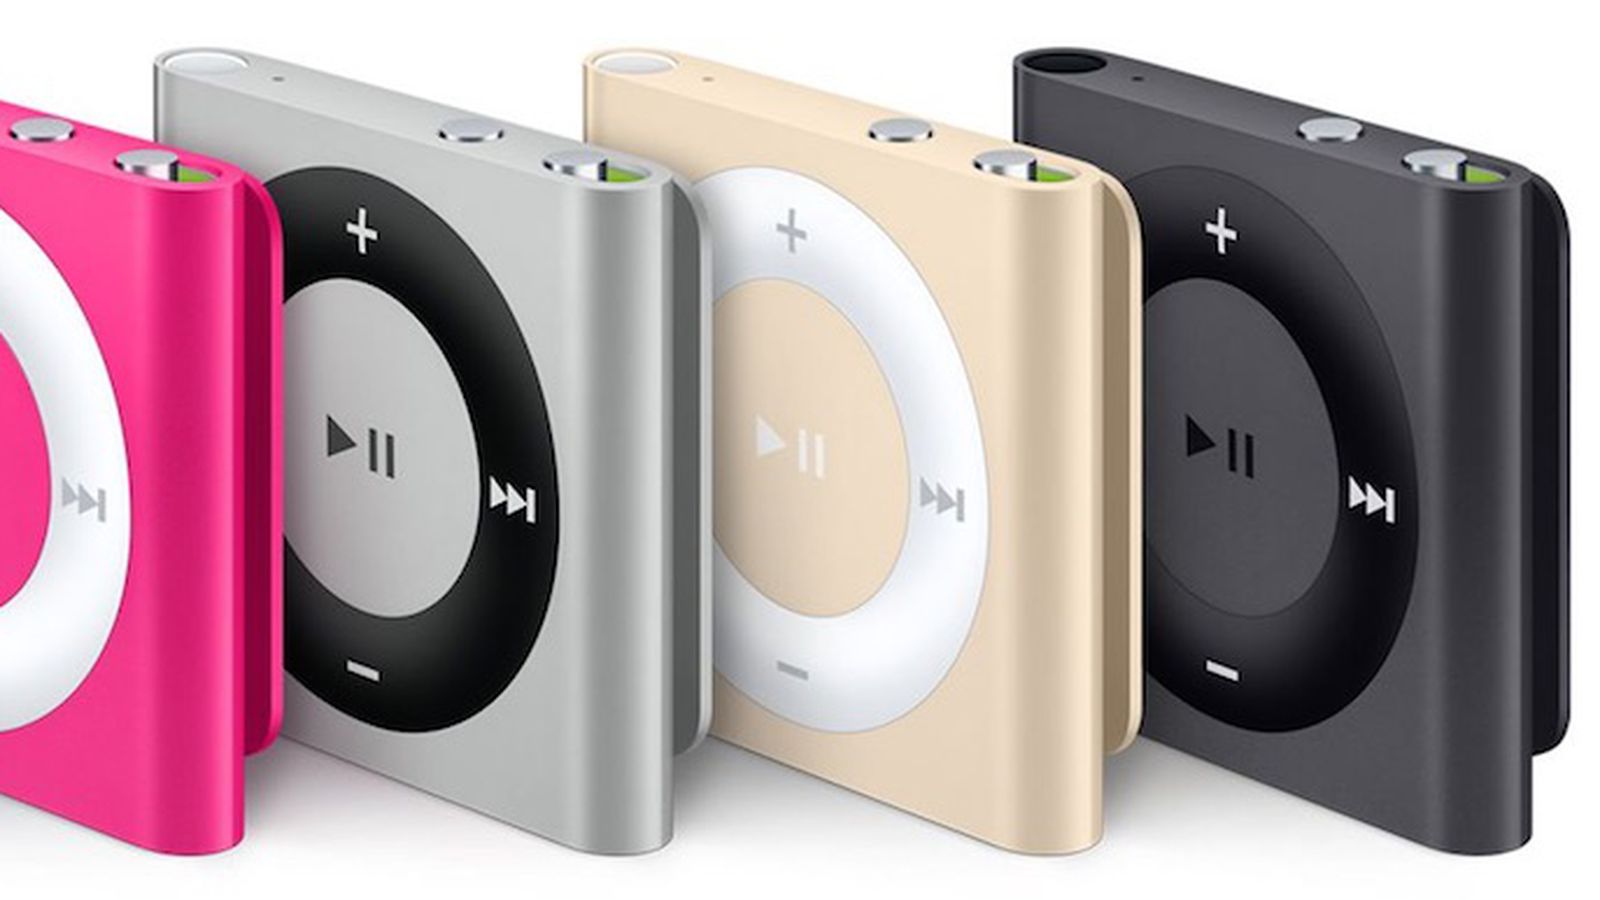 iPod Apple's Cheapest iPod, Now Discontinued